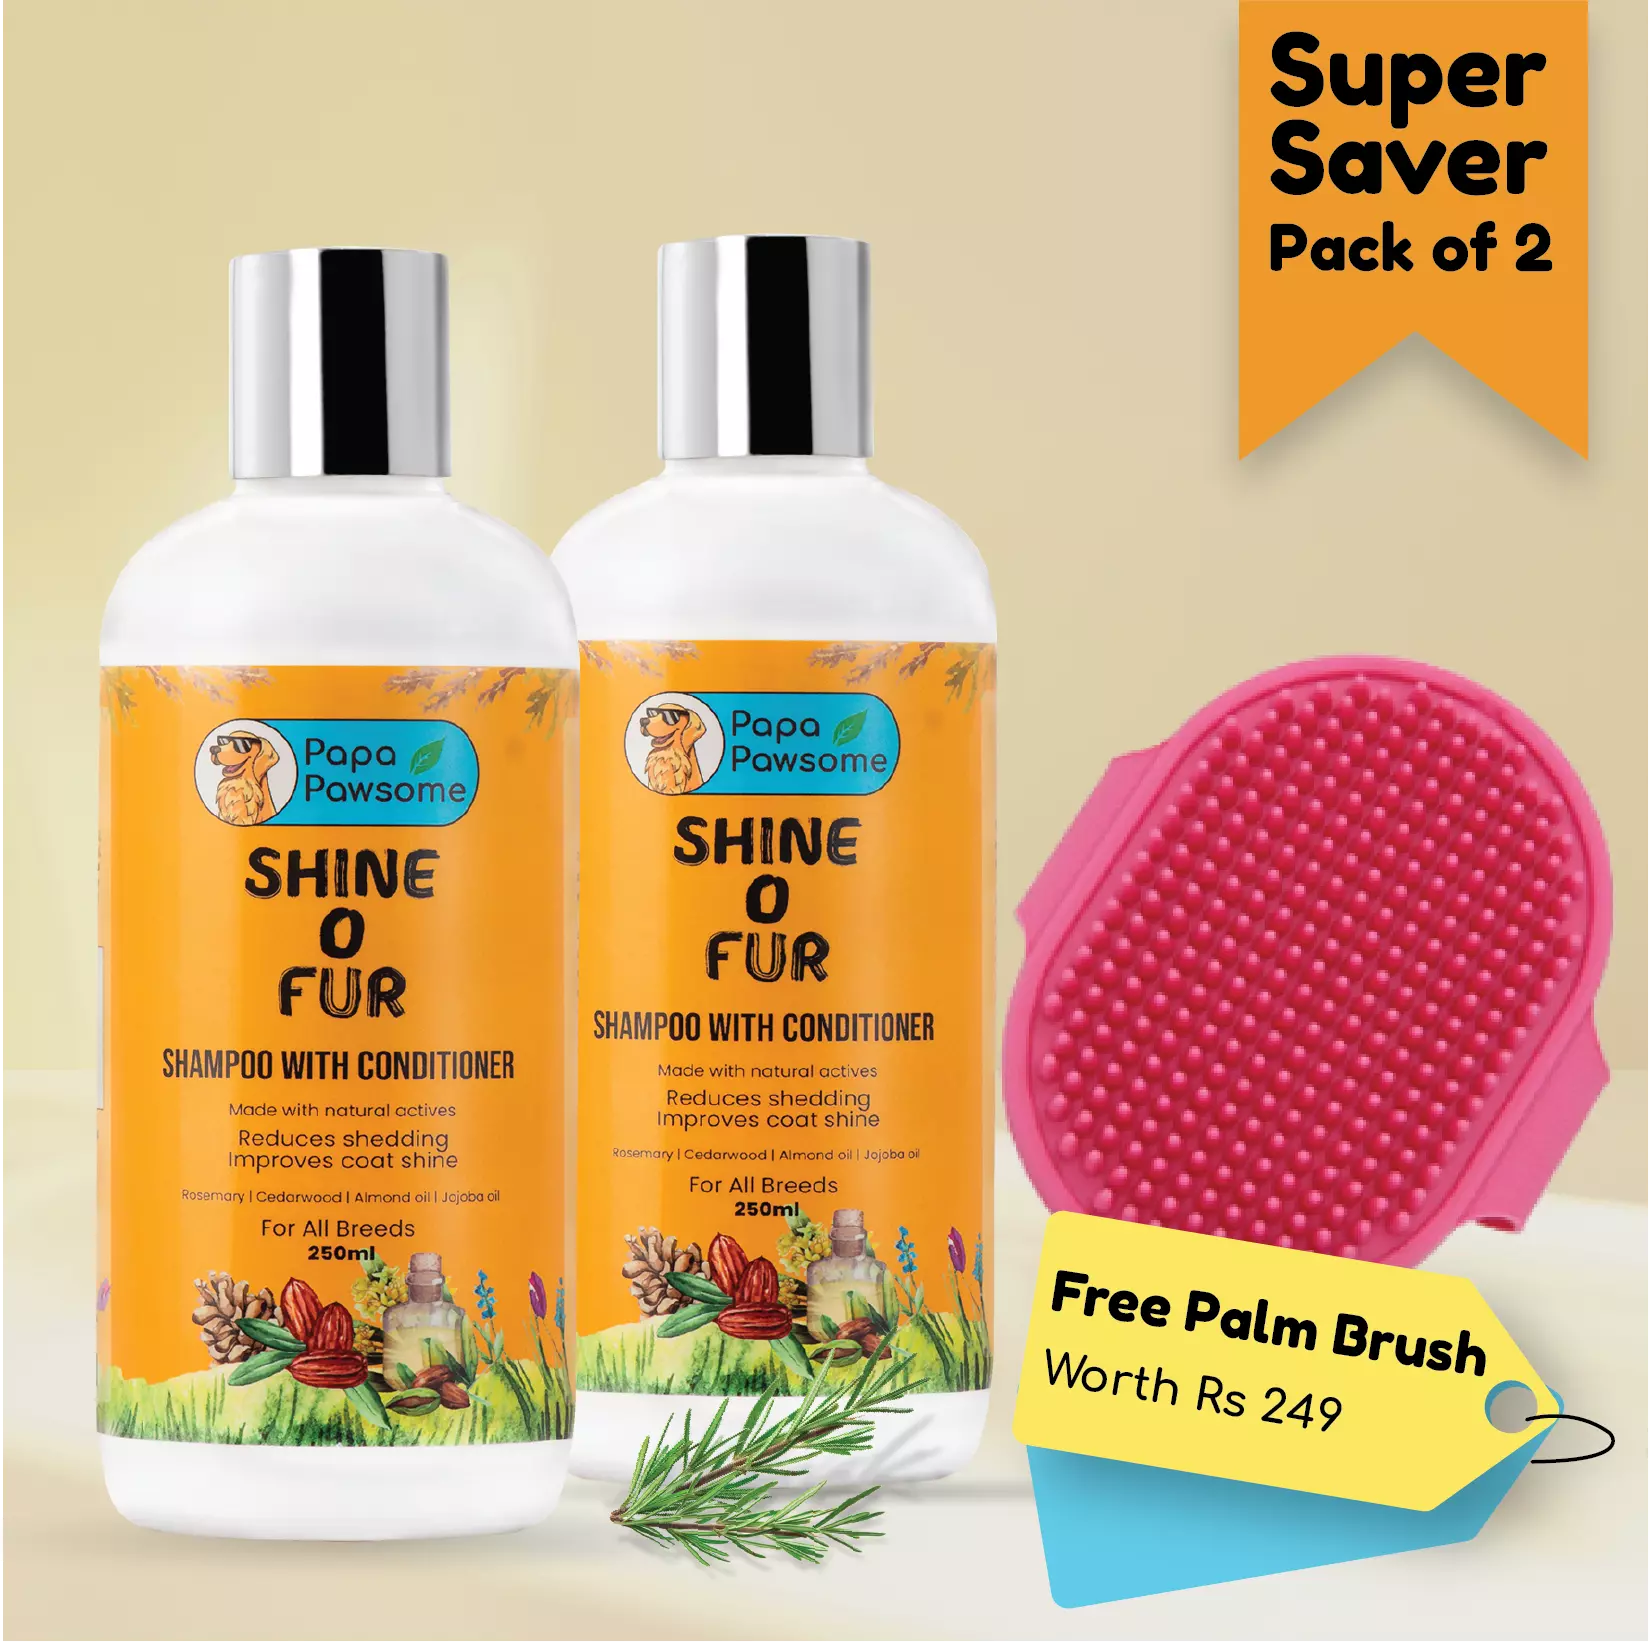 shampoo bottles pack of two super saver pack with free palm brush worth rs 249 with Jojoba Oil, Argan Oil, Aloe Vera Extract, Rosemary Essential Oil, and Cedarwood Essential Oil.